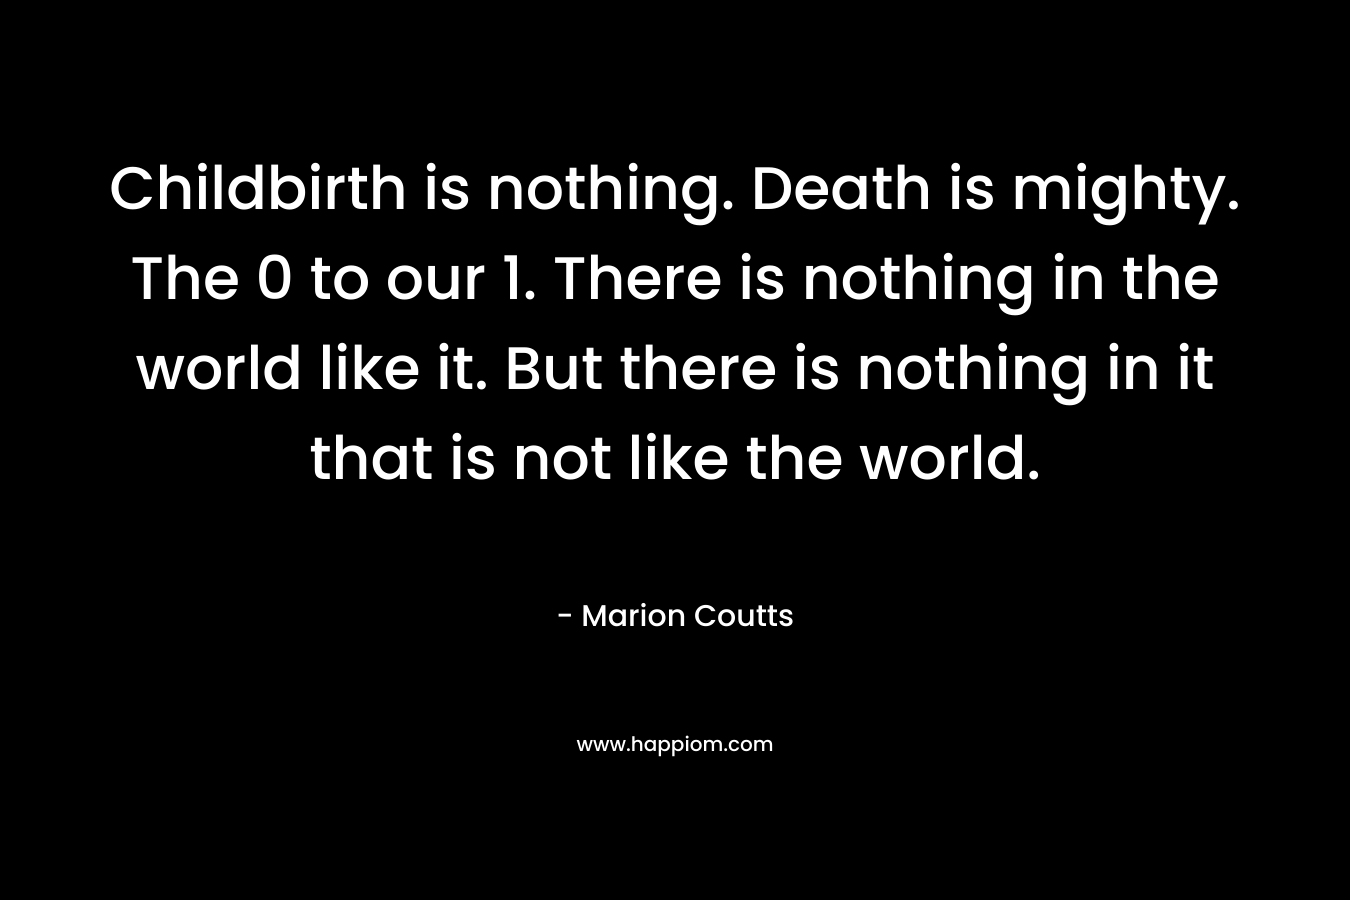 Childbirth is nothing. Death is mighty. The 0 to our 1. There is nothing in the world like it. But there is nothing in it that is not like the world. – Marion Coutts